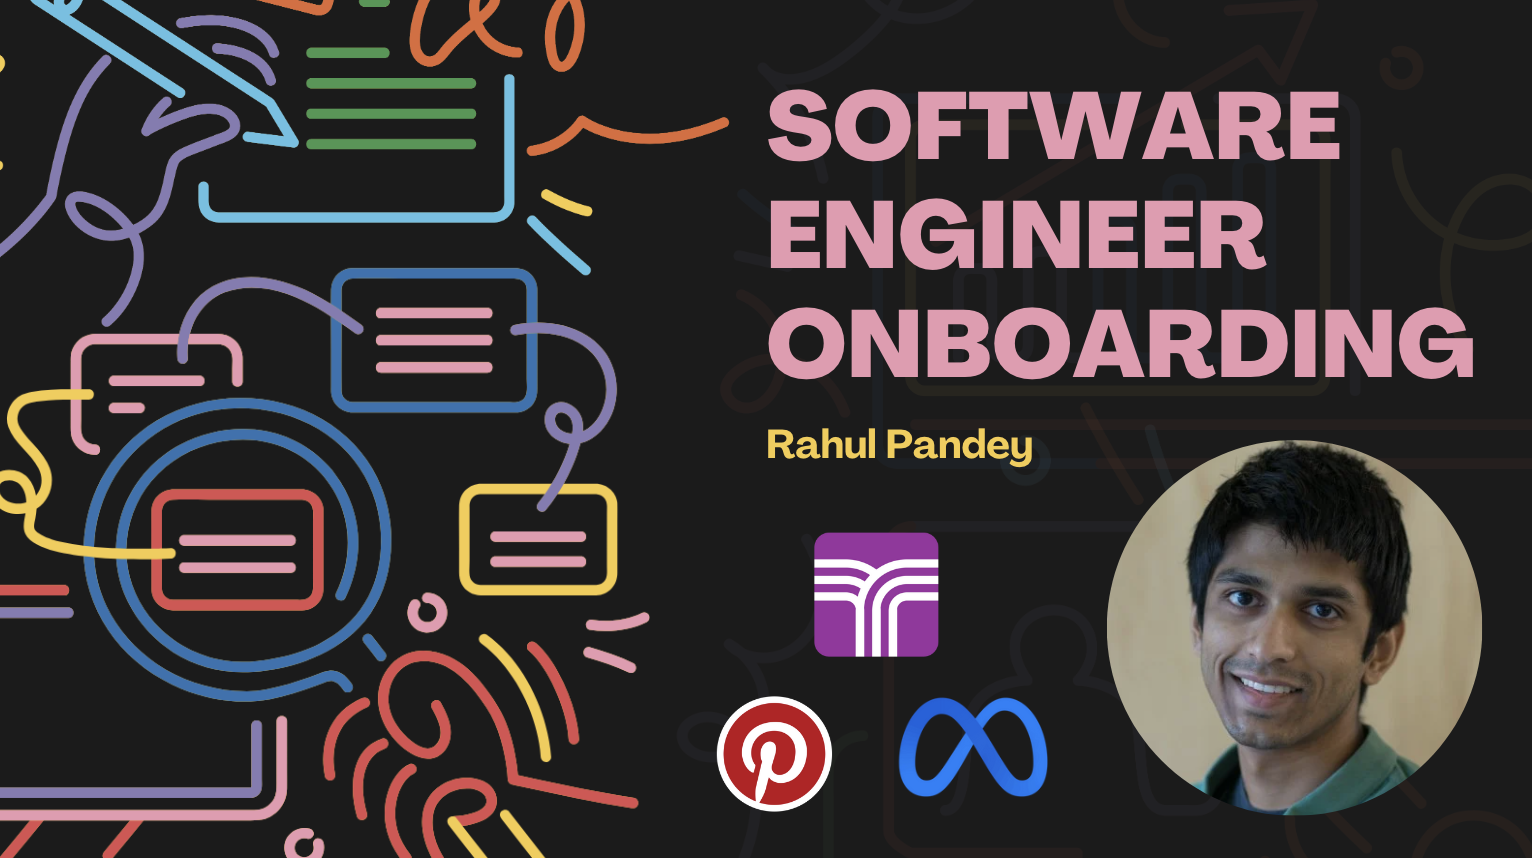 The Complete Onboarding Guide For Software Engineers: Succeeding When You're New course image